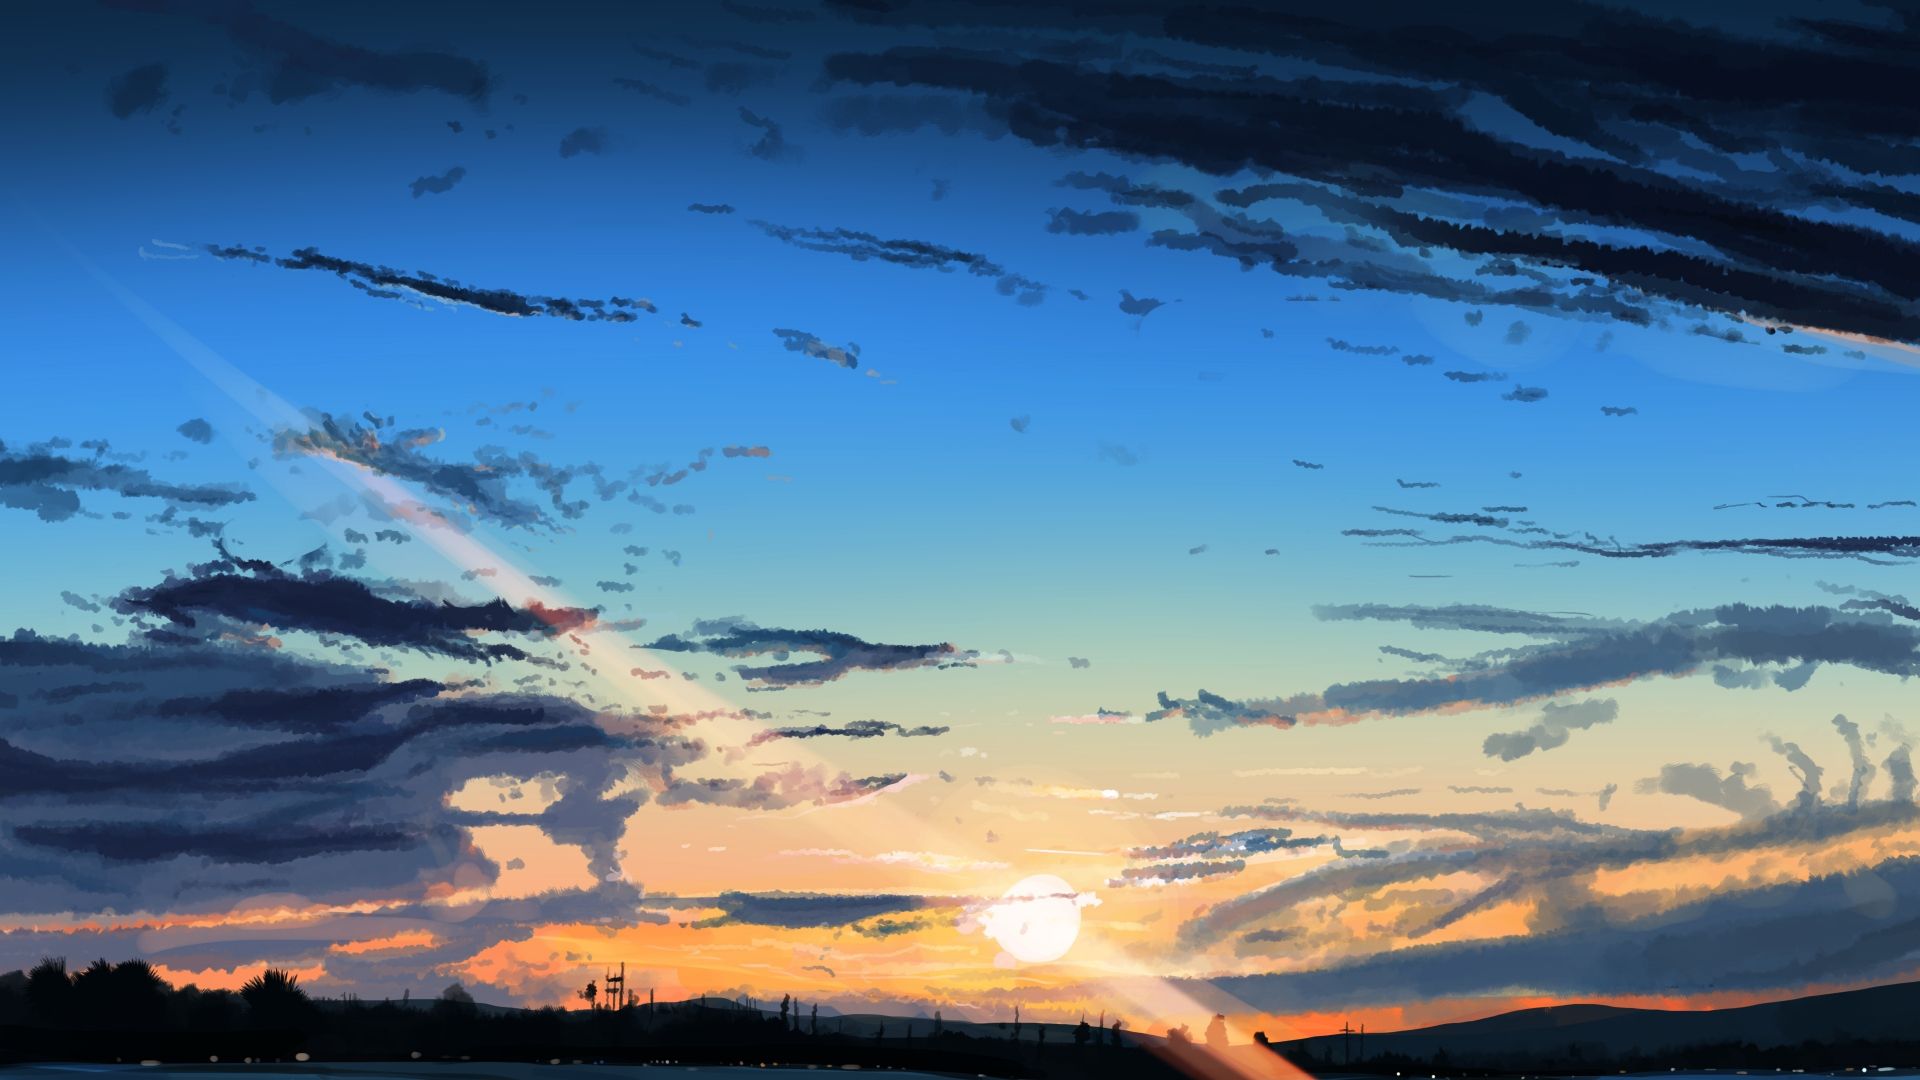 Download 1920x1080 wallpaper sunset, sky anime, clouds, original, full hd, hdtv, fhd, 1080p, 1920x1080 HD image, background, 4506